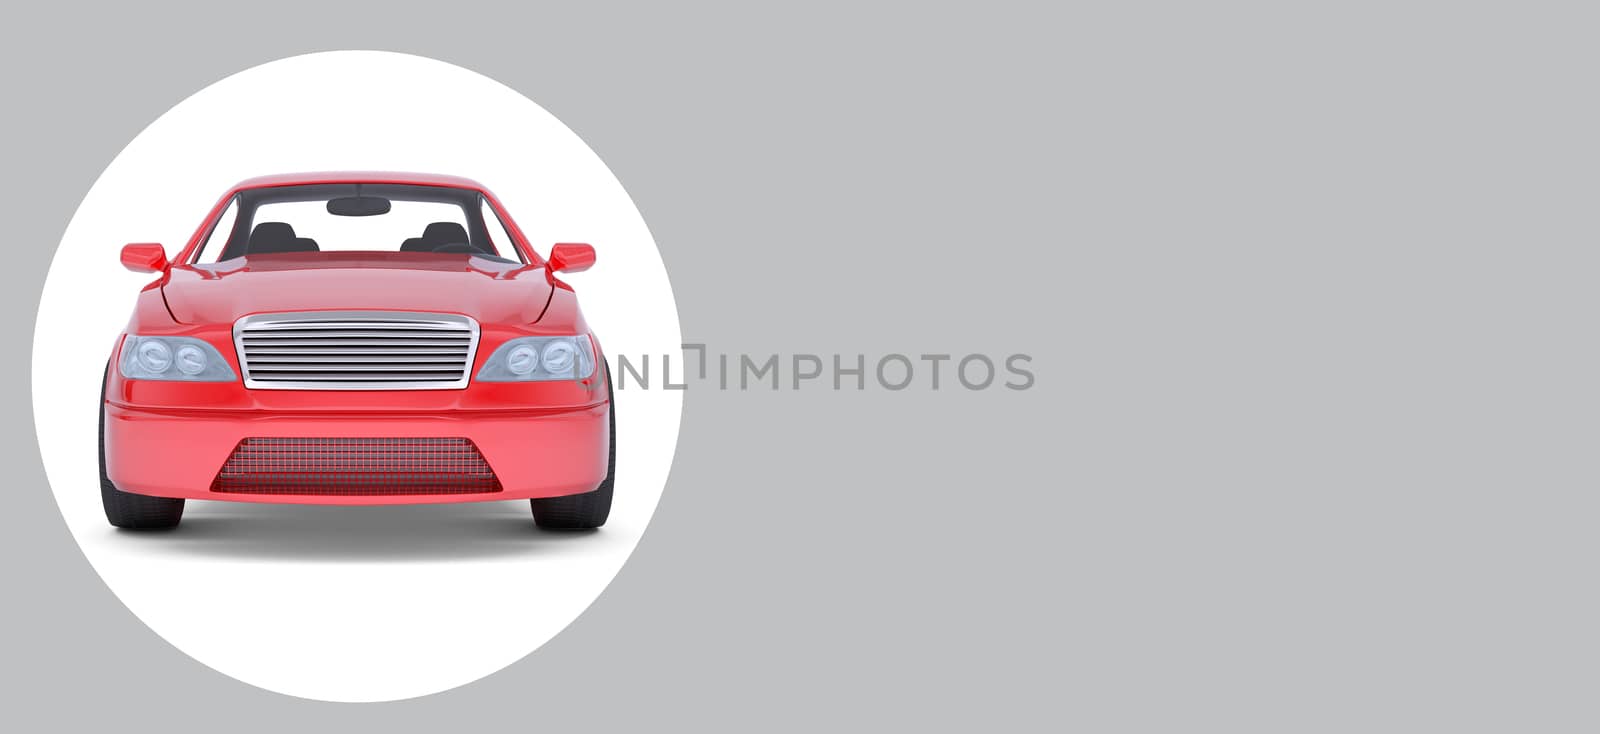 Red car in white circle on isolated grey background